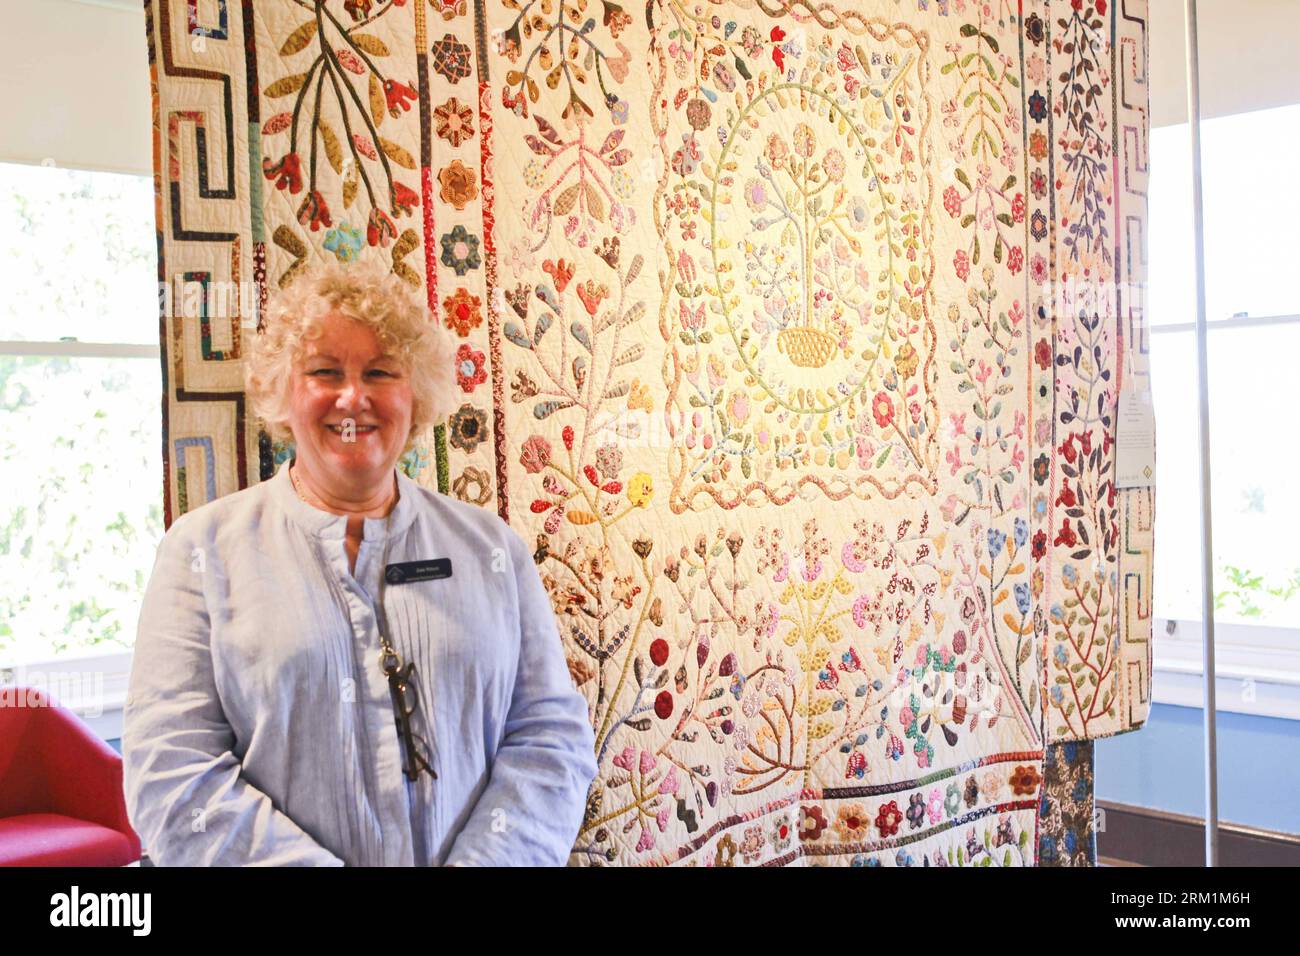 Bildnummer: 59598385  Datum: 03.05.2013  Copyright: imago/Xinhua (130503) -- SYDNEY, May 3, 2013 (Xinhua) -- Madame Dale stands in front of her hand-made quilt at the Brush Farm Quilt show in Rhyde out of Sydney, Australia, on May 3, 2013. The quilt show is under the sponsorship of the Quilters Guild of the New South Wales state of Australia. Two exquisite quilts will be auctioned off to raise funds for the Special Olympics. (Xinhua/Jin Linpeng) (djj) AUSTRALIA-SYDNEY-QUILT SHOW PUBLICATIONxNOTxINxCHN xcb x0x 2013 quer      59598385 Date 03 05 2013 Copyright Imago XINHUA  Sydney May 3 2013 XIN Stock Photo